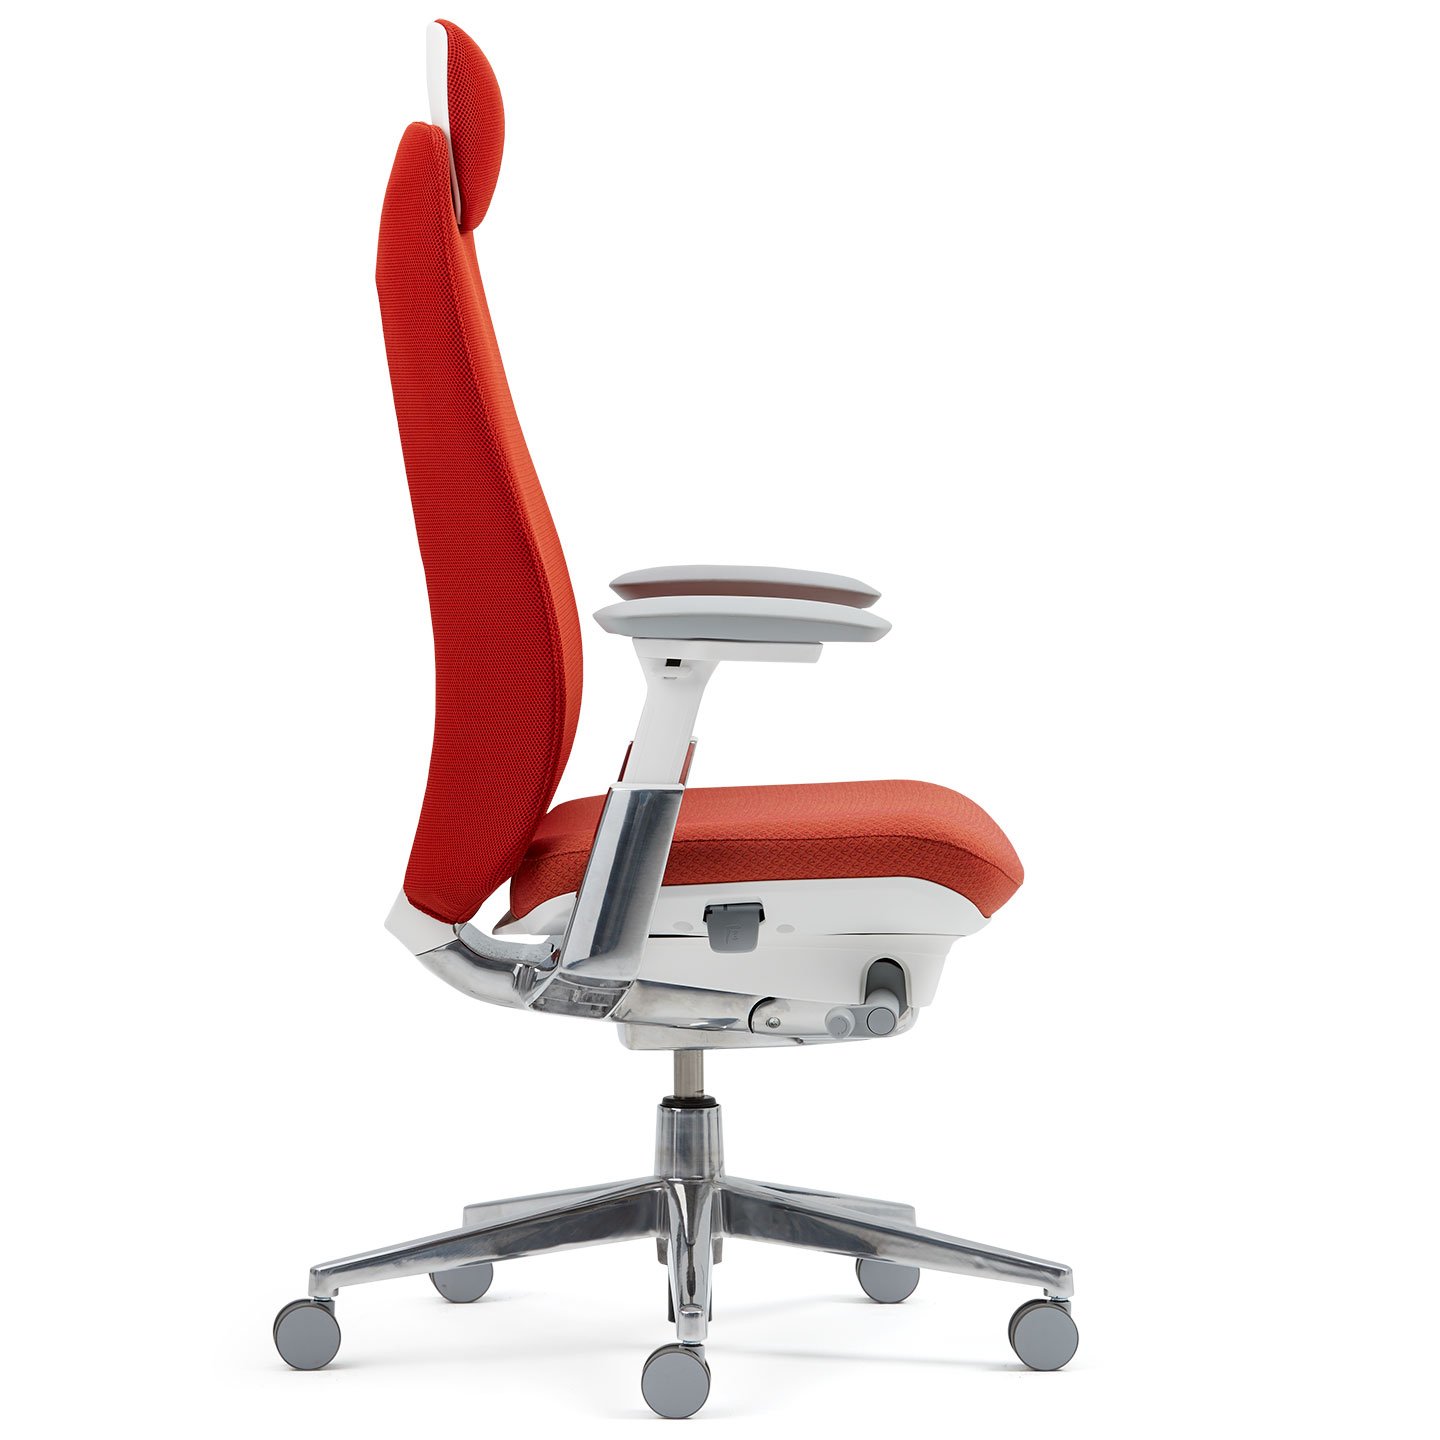 Haworth Fern Executive Task chair in red upholstery side view